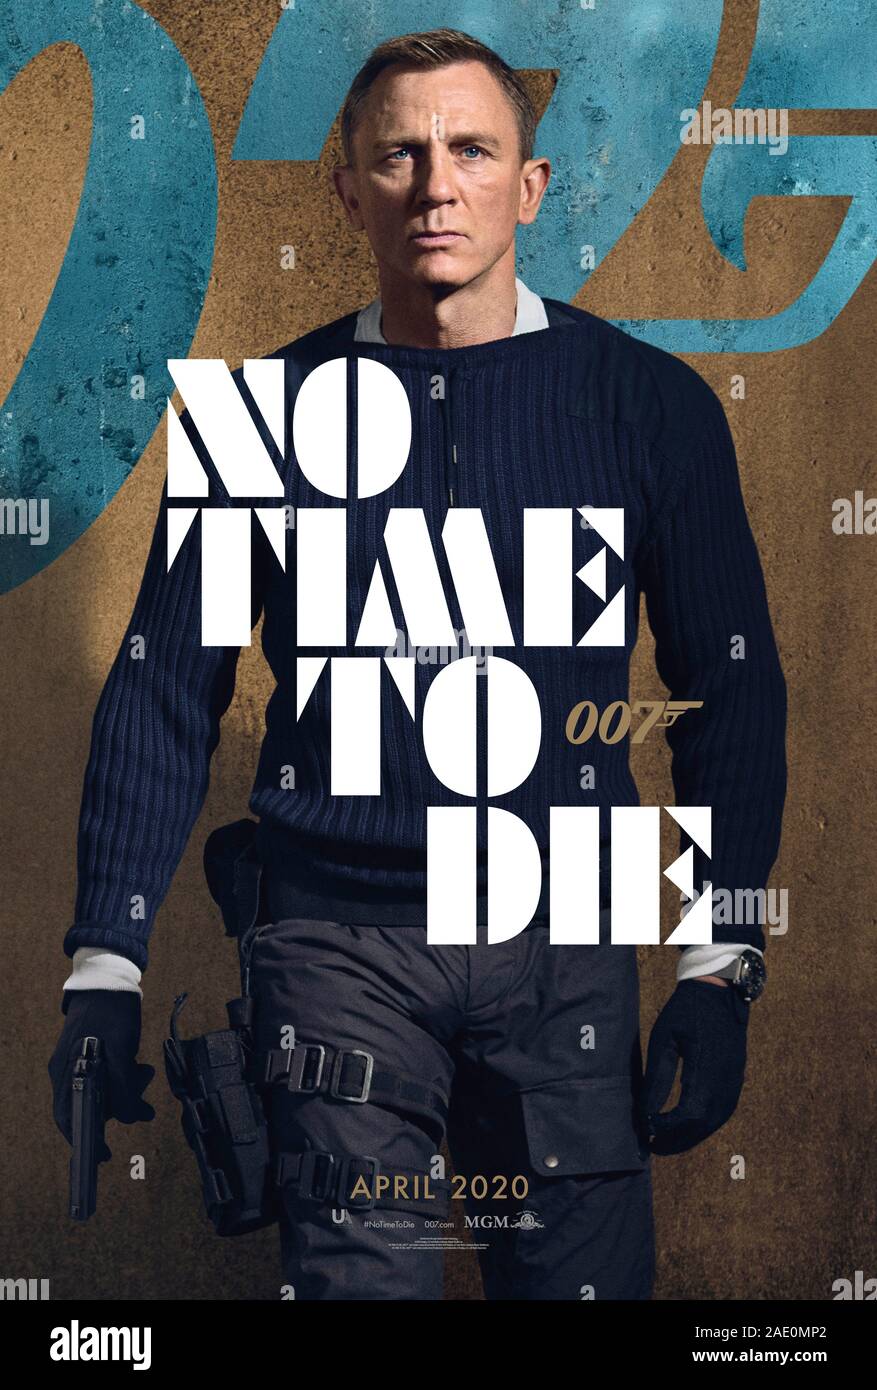 RELEASE DATE: April 8, 2020 TITLE: No Time To Die STUDIO: MGM DIRECTOR:  Cary Joji Fukunaga PLOT: Bond has left active service. His peace is  short-lived when his old friend Felix Leiter